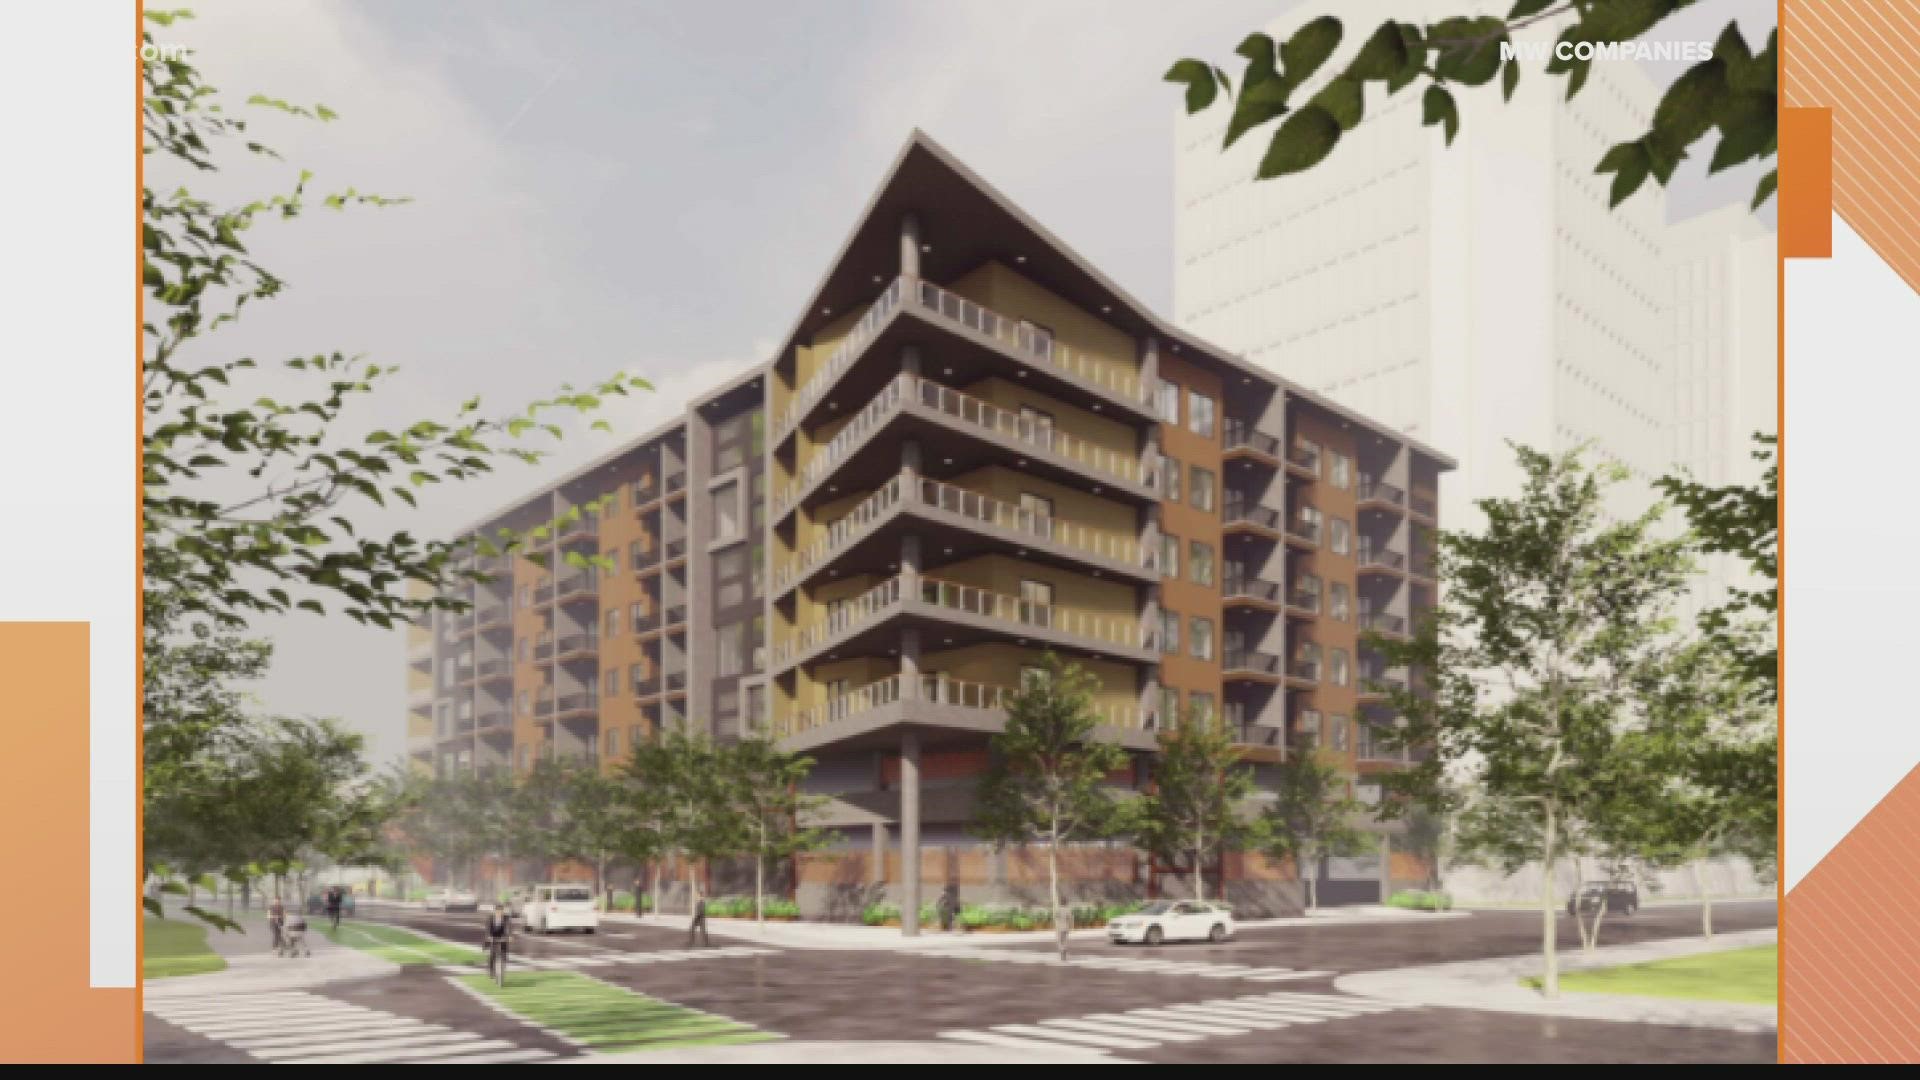 The proposed development would have at least 125 units on top of a three-story parking garage with a pool and rooftop deck